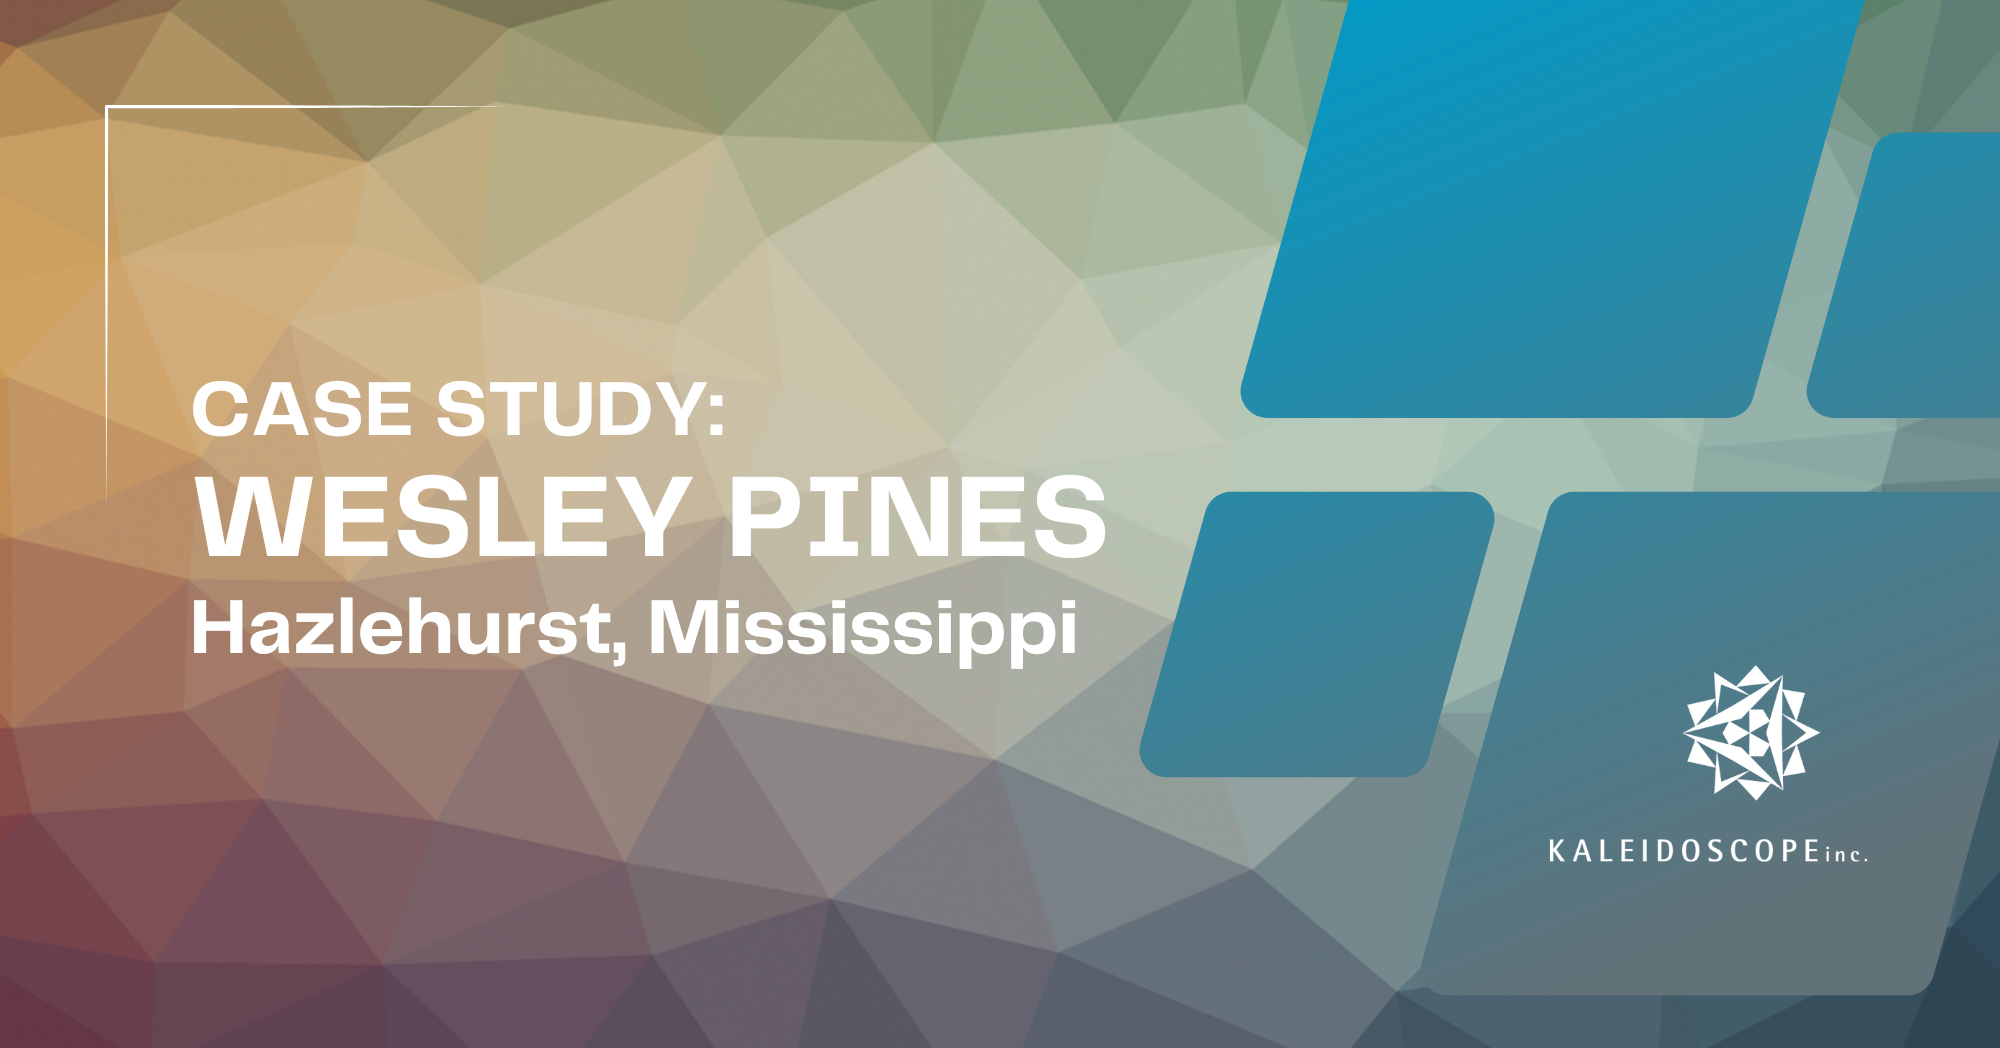 Case Study: Wesley Pines